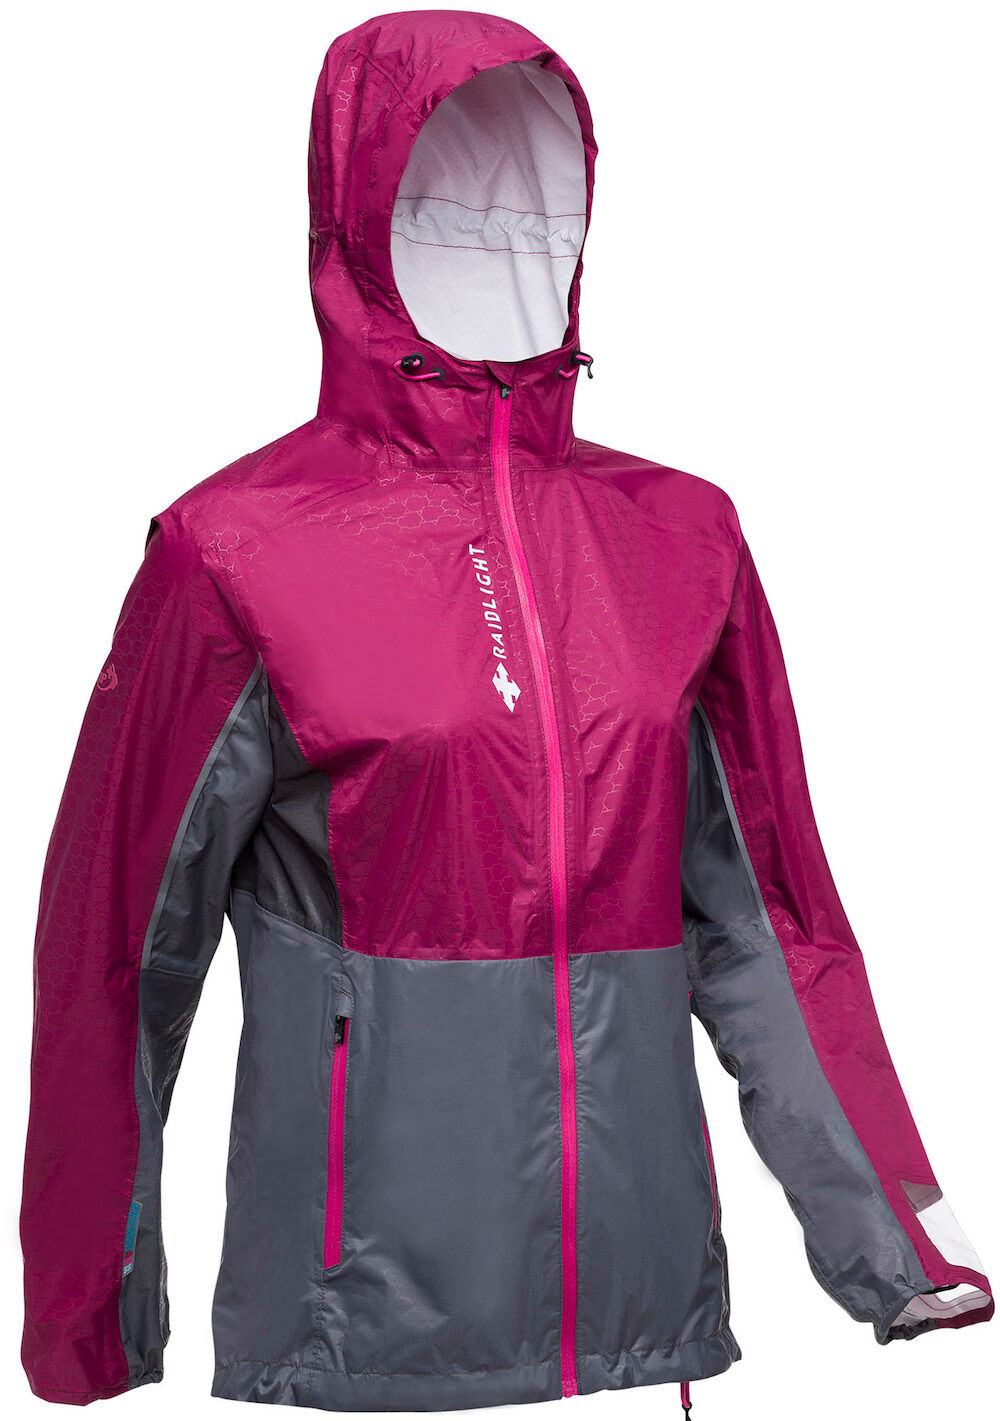 Raidlight - Top Extreme Mp + Jacket - Chaqueta impermeable - Mujer